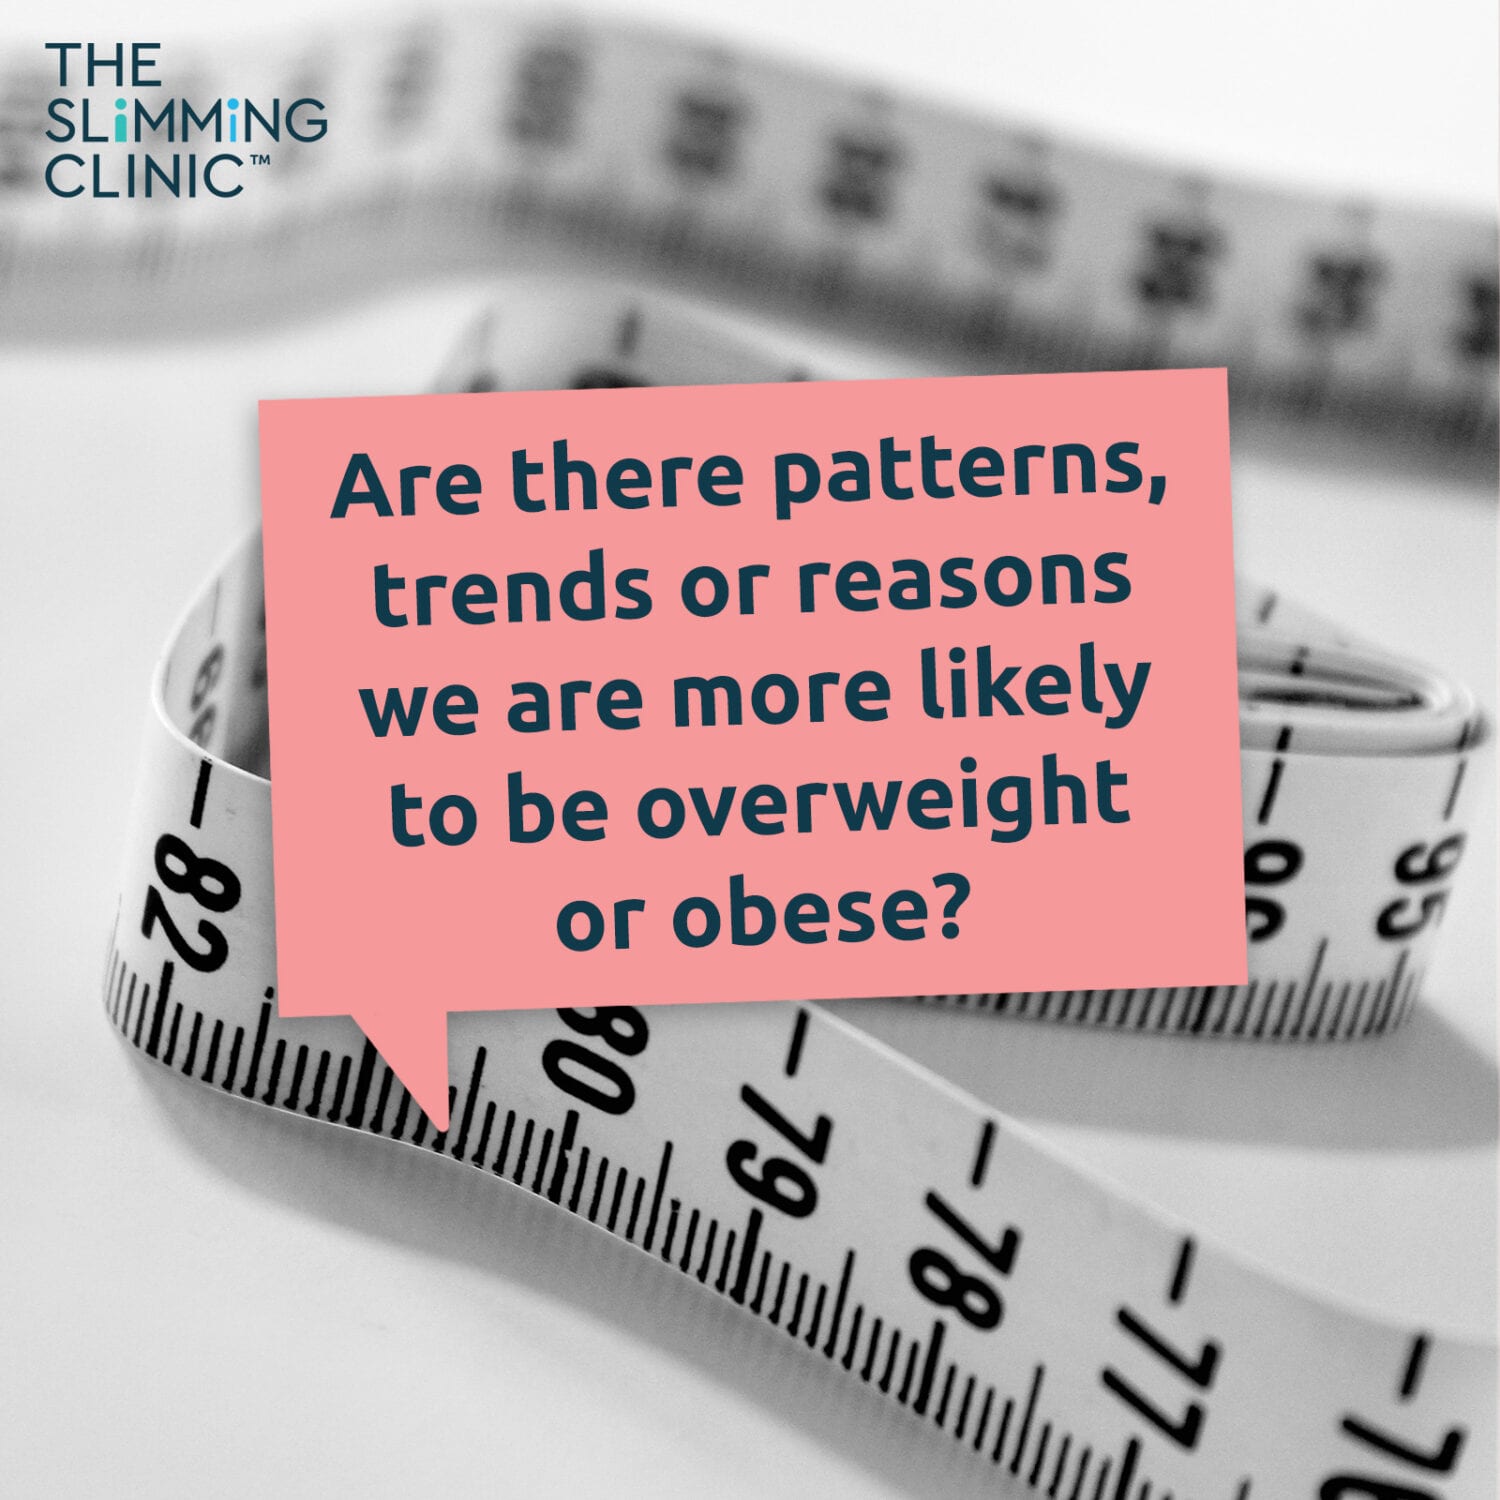 Do certain factors make us more likely to be obese or overweight?